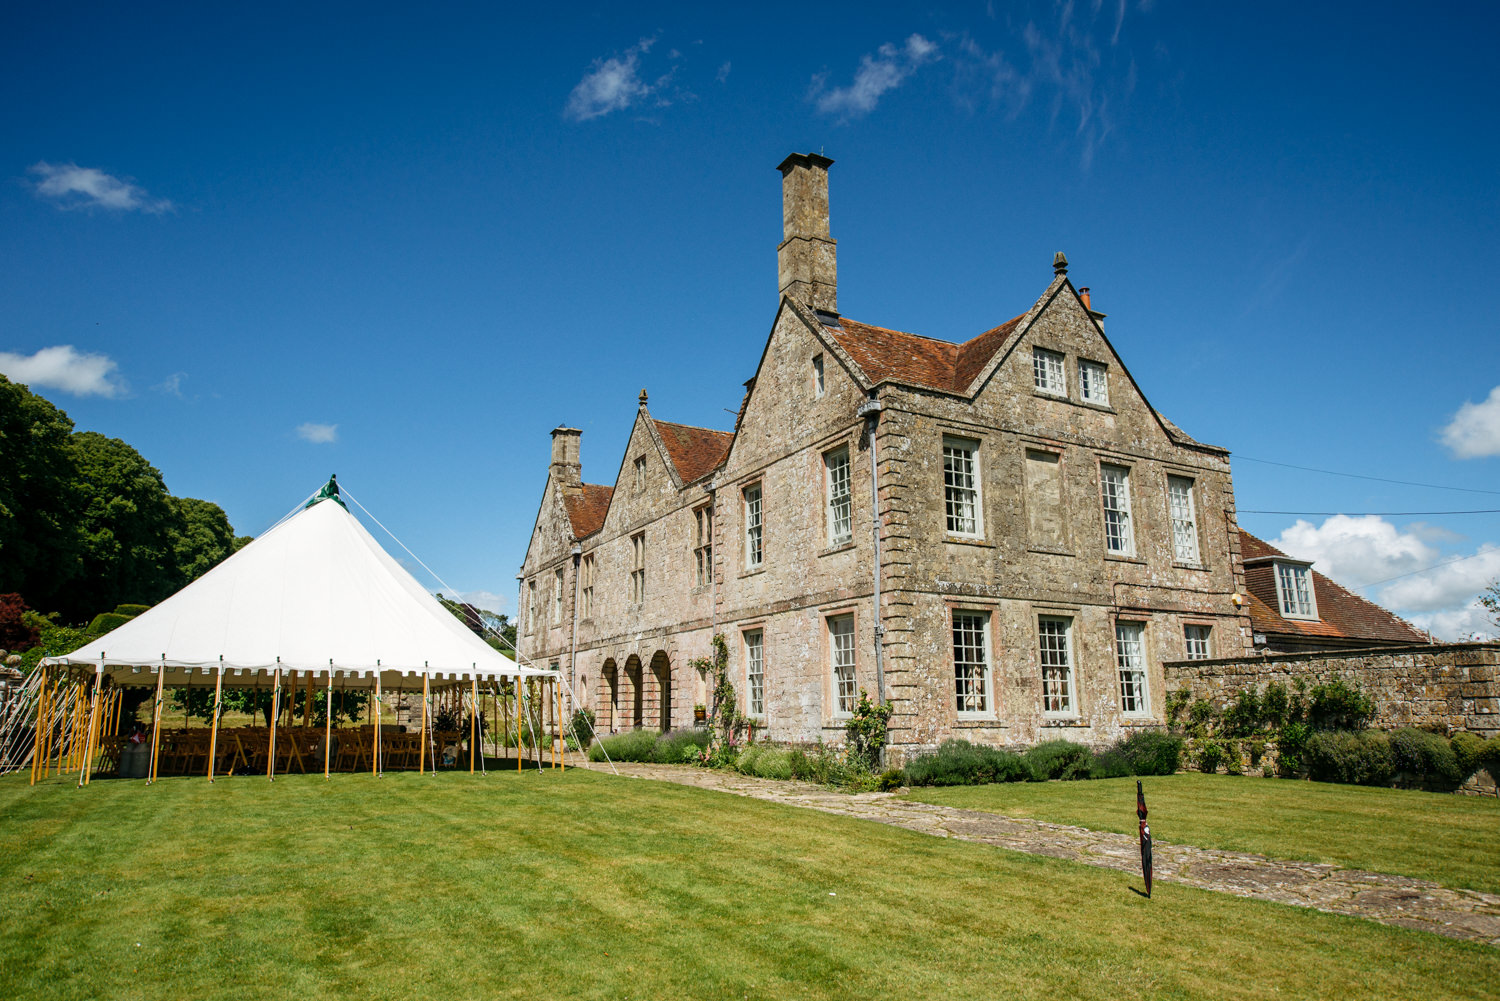 Outdoor Wedding Ceremony at Hatch House